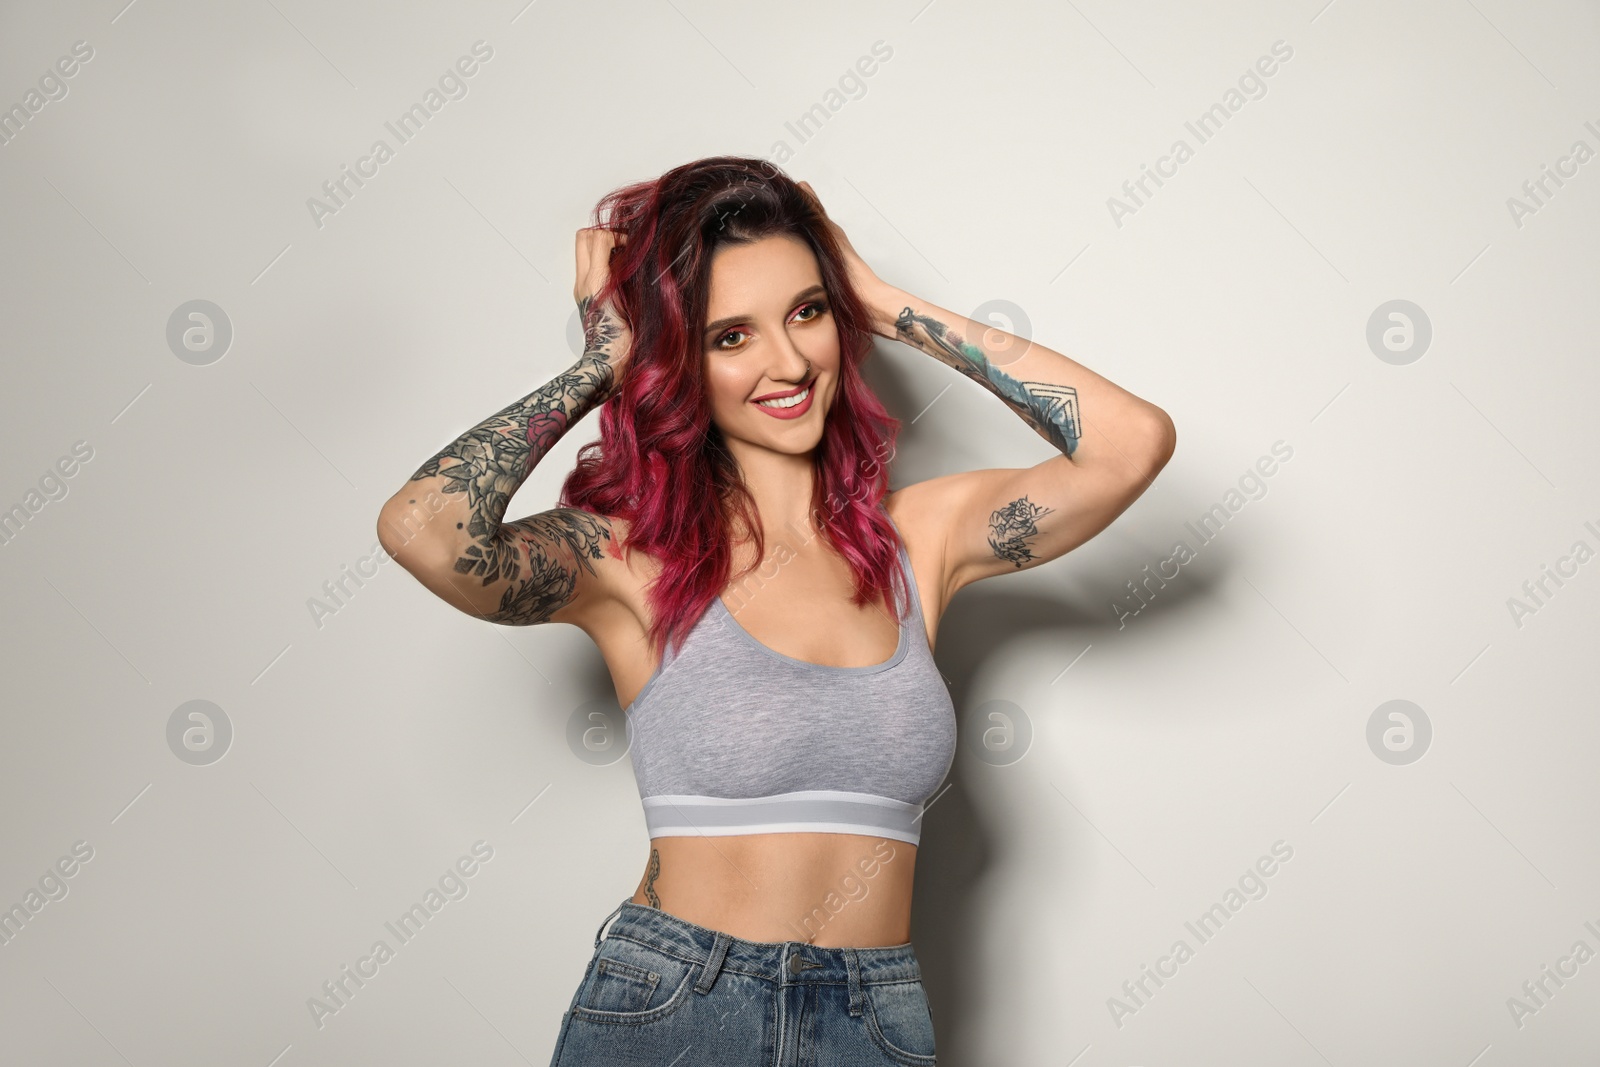 Photo of Beautiful woman with tattoos on body against light background